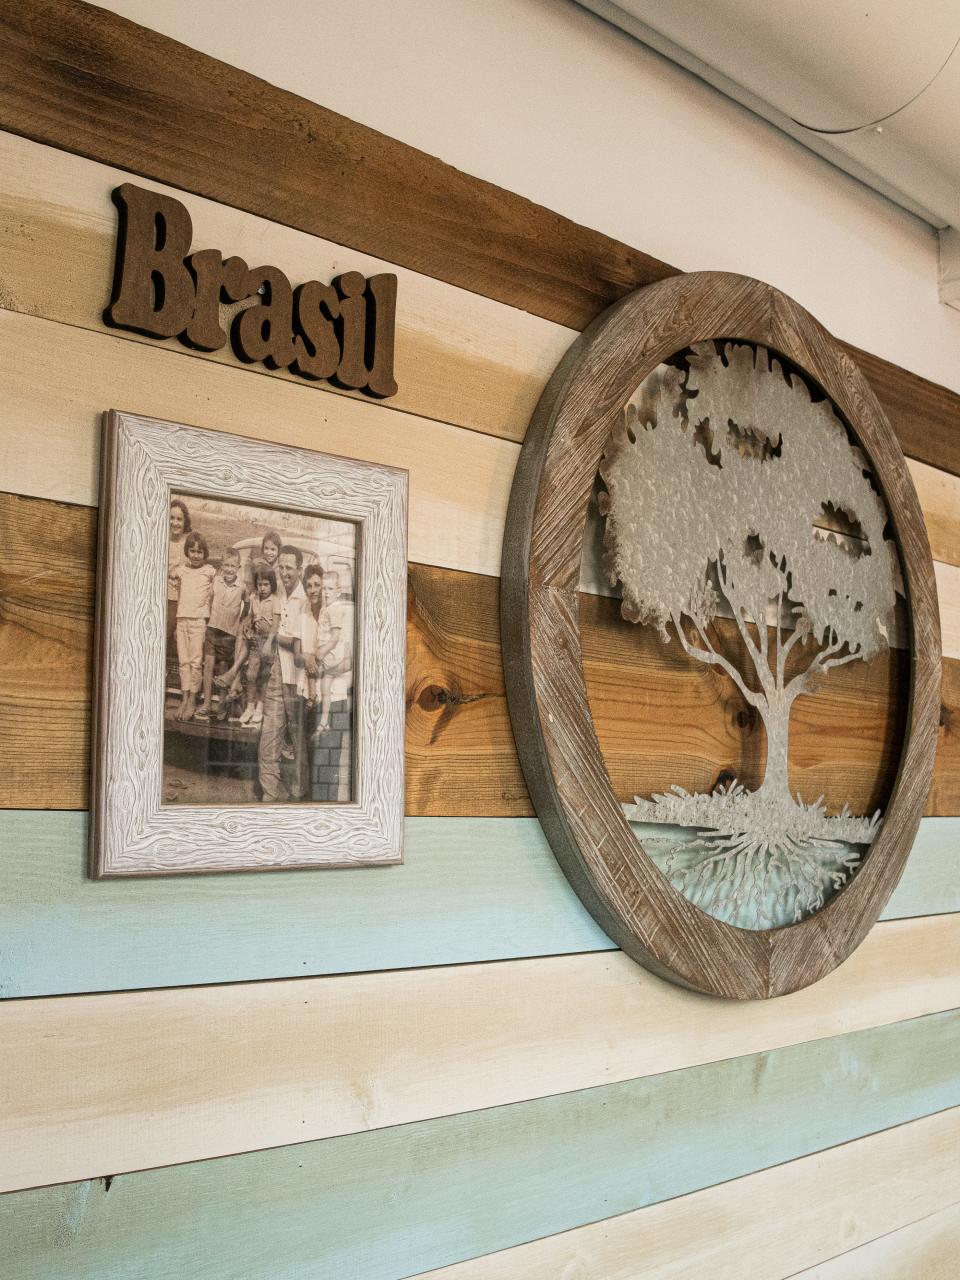 Roots of Brasil, a restaurant opening Saturday April 30 in downtown Sioux Falls, is run by the Grogan family whose roots trace back to Brazil. Old family photos hang on the walls of the  "family room" of the new restaurant.